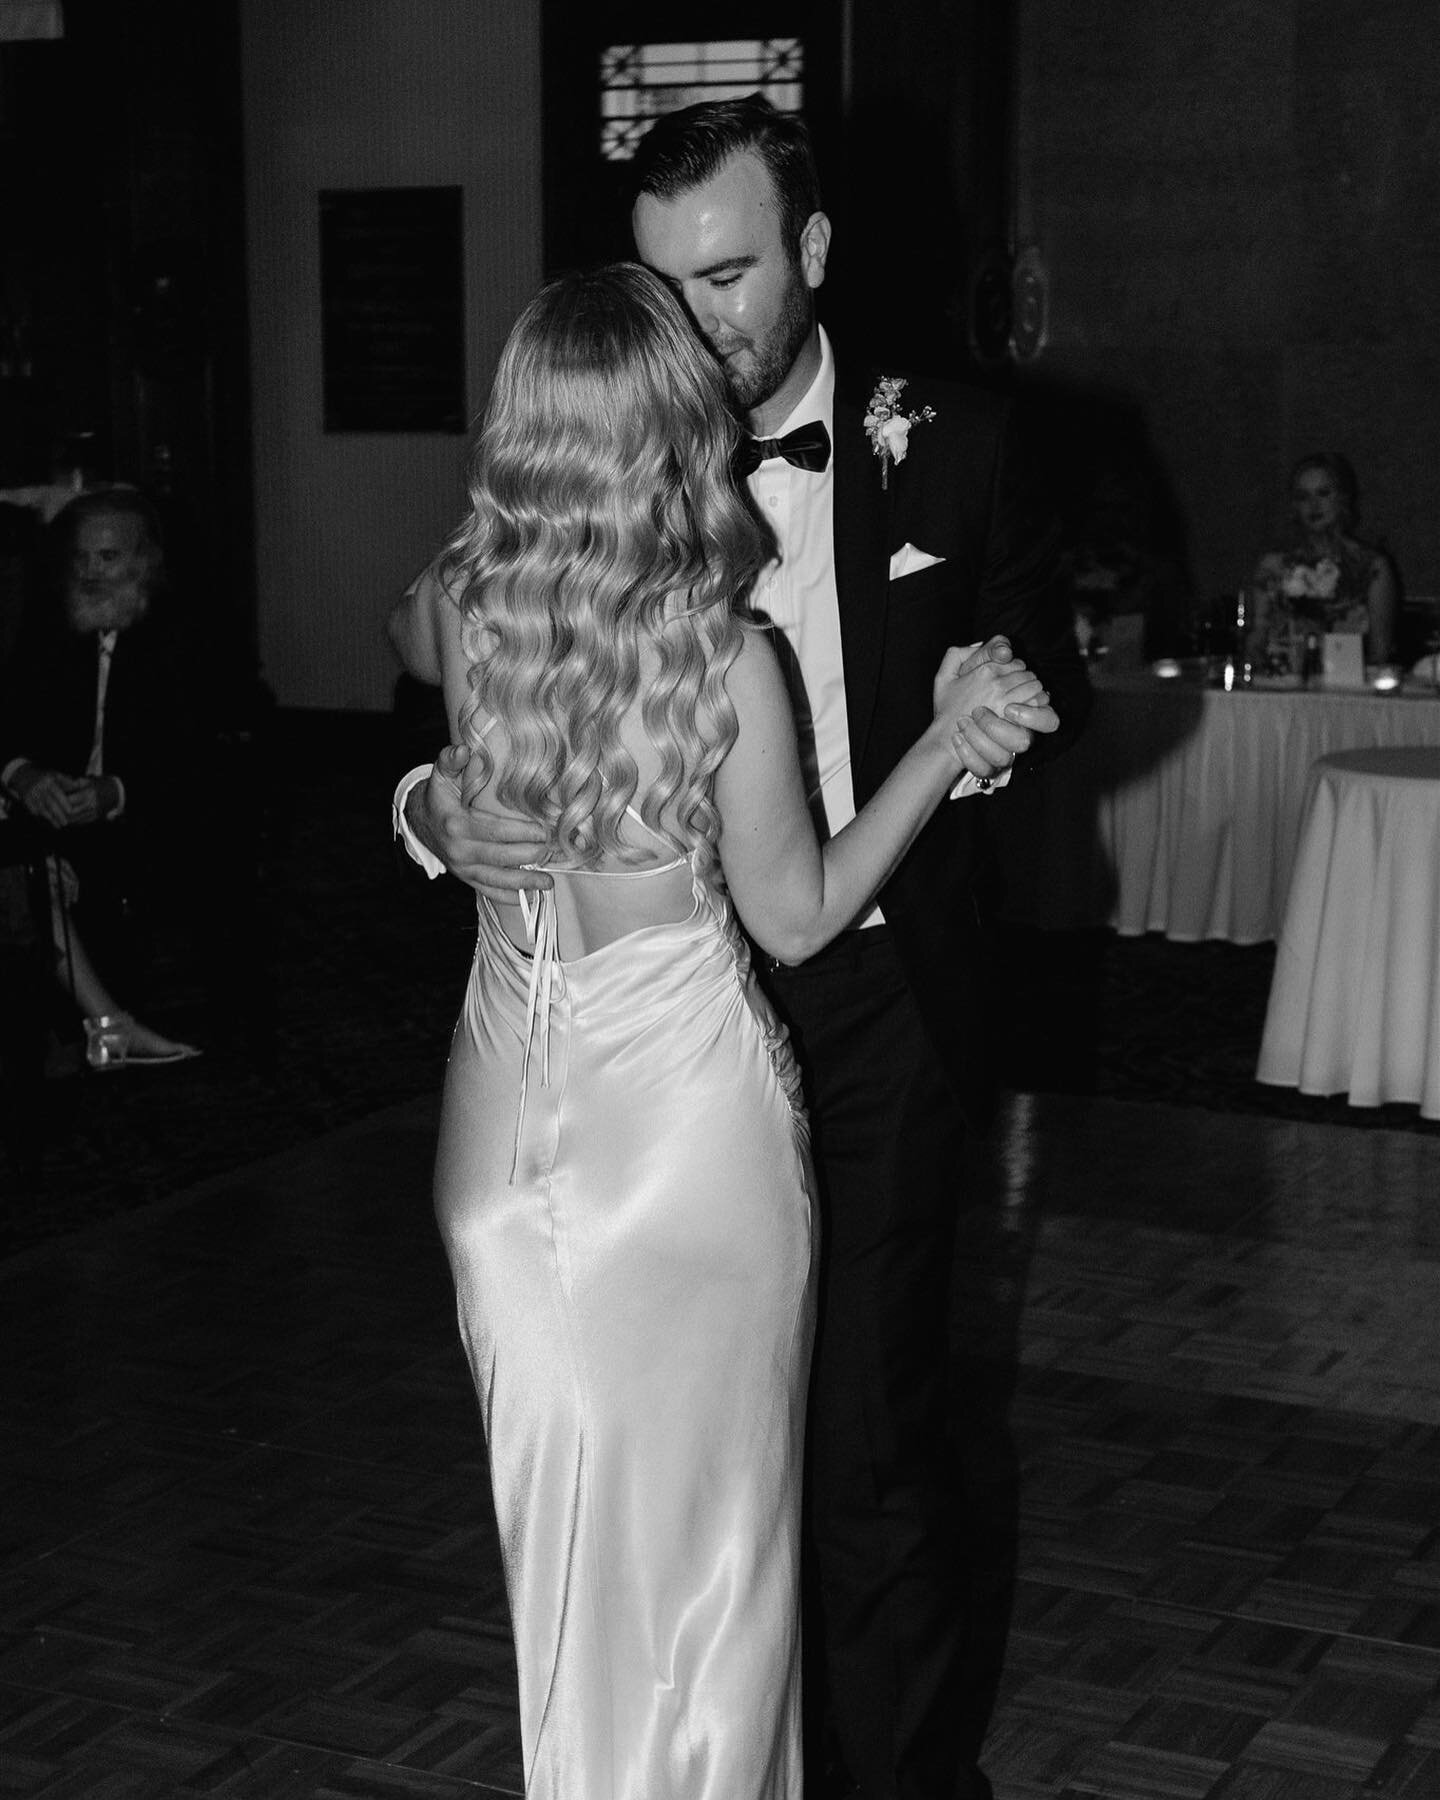 Genevieve and David showing us just how beautiful an elegant embrace can be. Knowing how to hold your partner beautifully (strong and supportive but not too stiff or overly structured) for dancing isn&rsquo;t easy&hellip; these two lovers giving us a